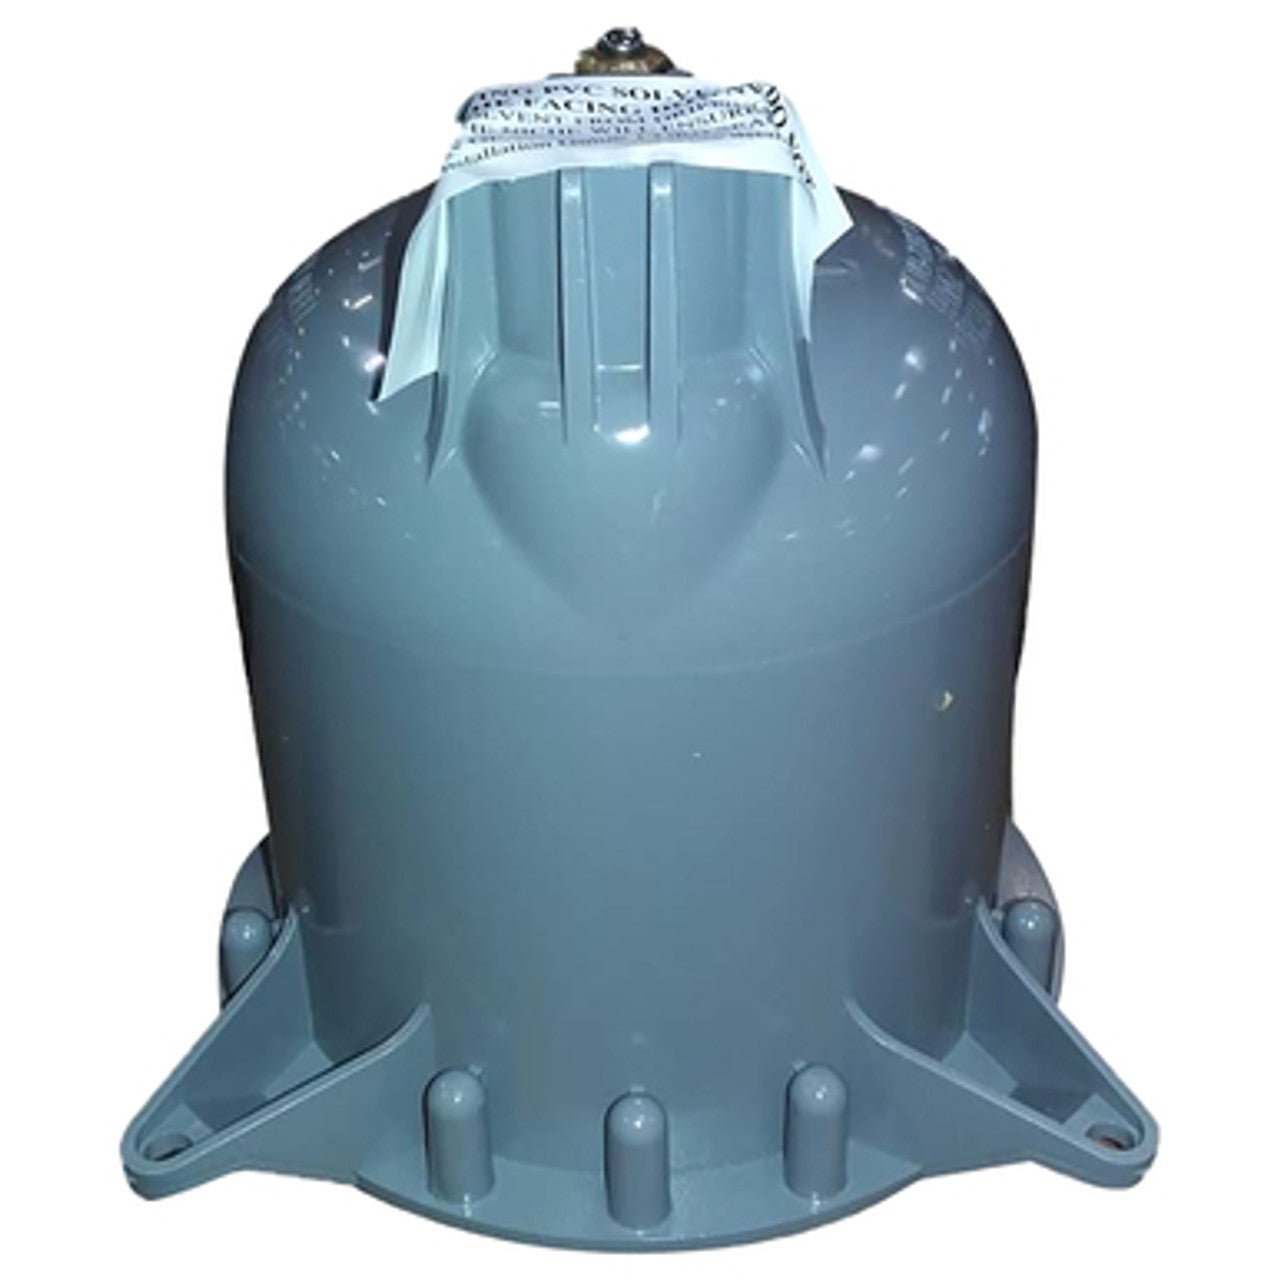 Pentair Small PVC Niche for Concrete Pools 79206600 - Pool Lights - img-2